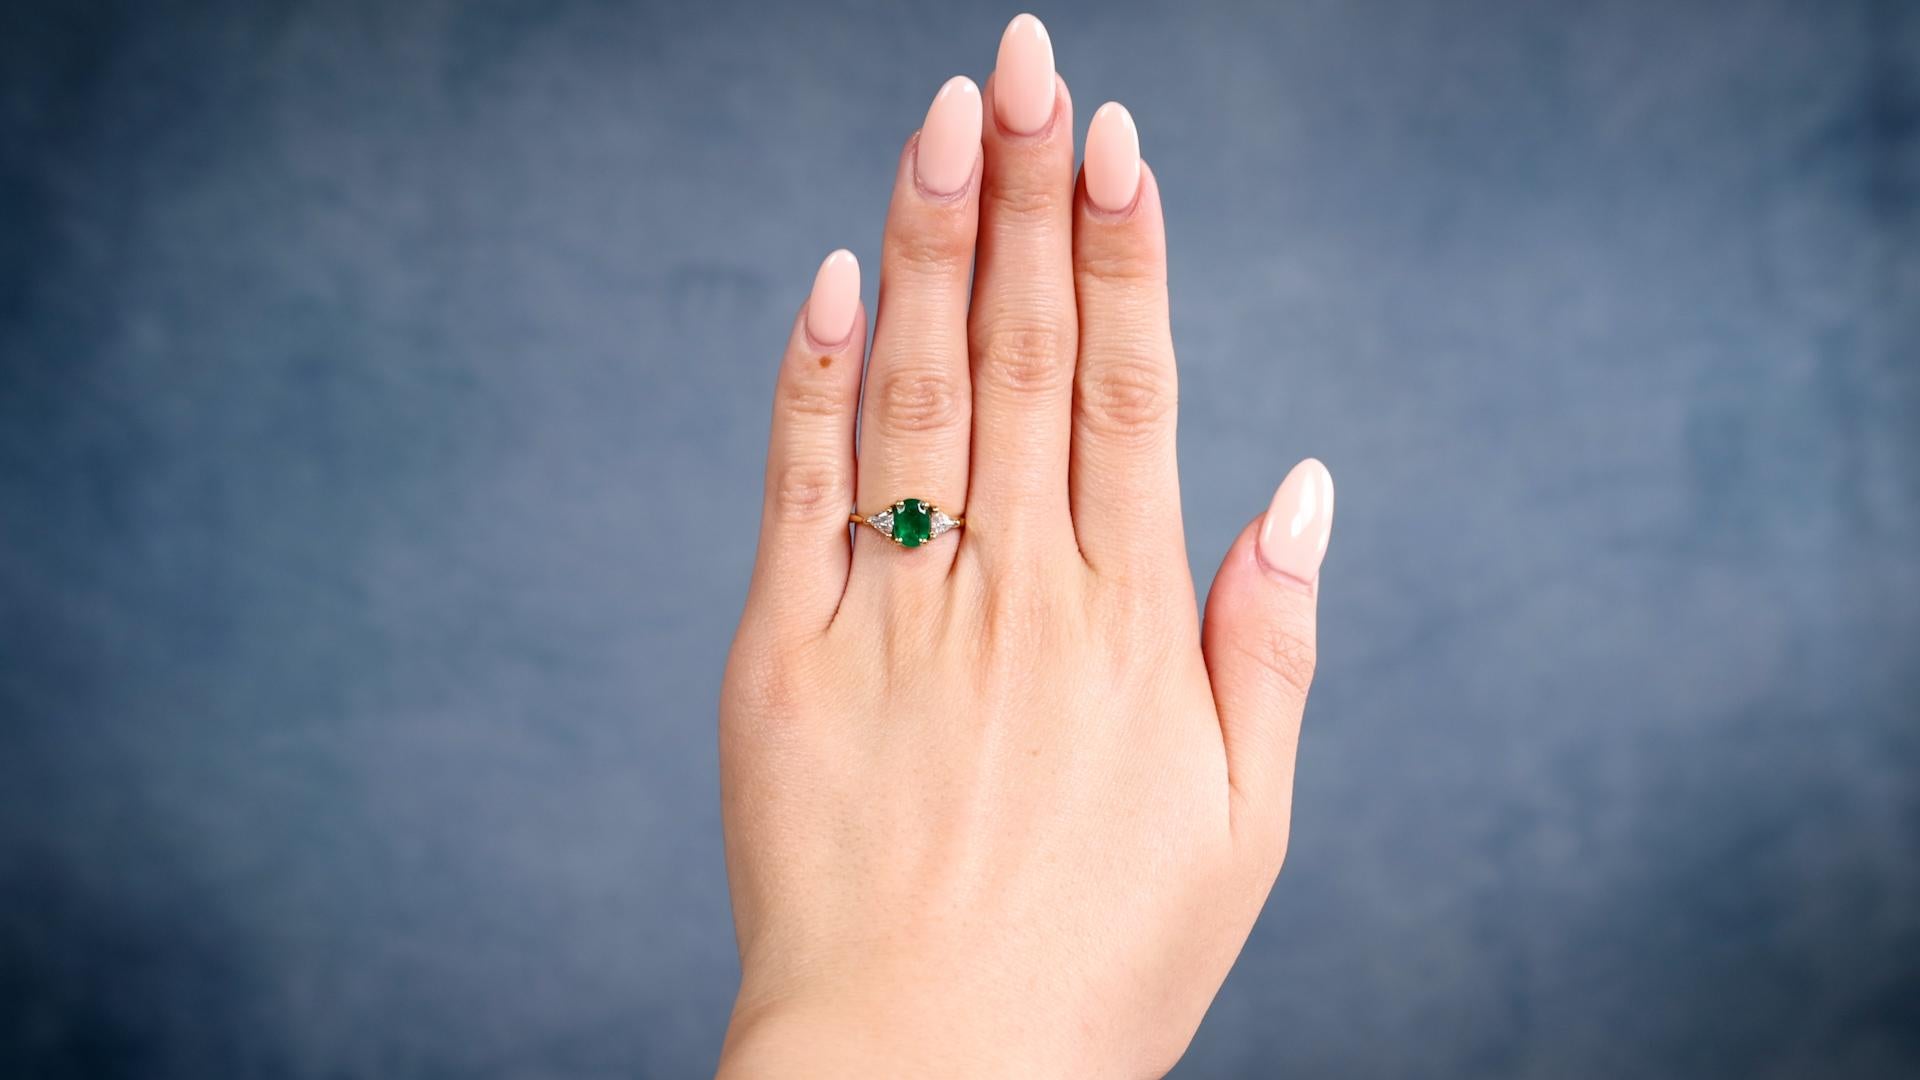 One Vintage Emerald Diamond 18k Yellow Gold Ring. Featuring one cushion cut emerald weighing approximately 0.70 carat. Accented by two trillion cut diamonds with a total weight of approximately 0.30 carat, graded F color, VS clarity. Crafted in 18